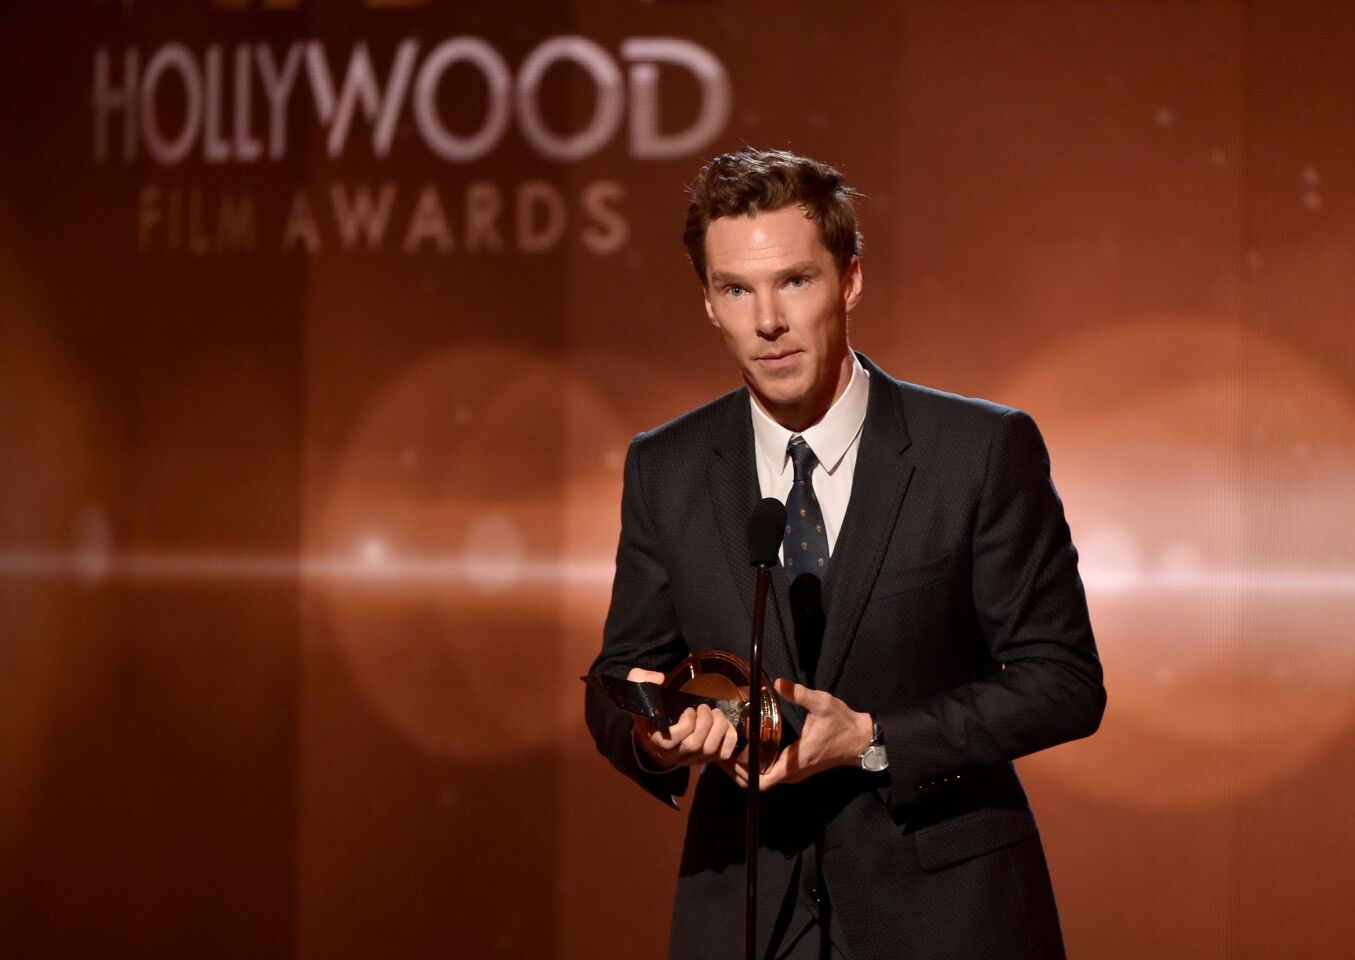 Cumberbatch won the Hollywood Actor Award for "The Imitation Game" at the 18th Hollywood Film Awards on Nov. 14, 2014.